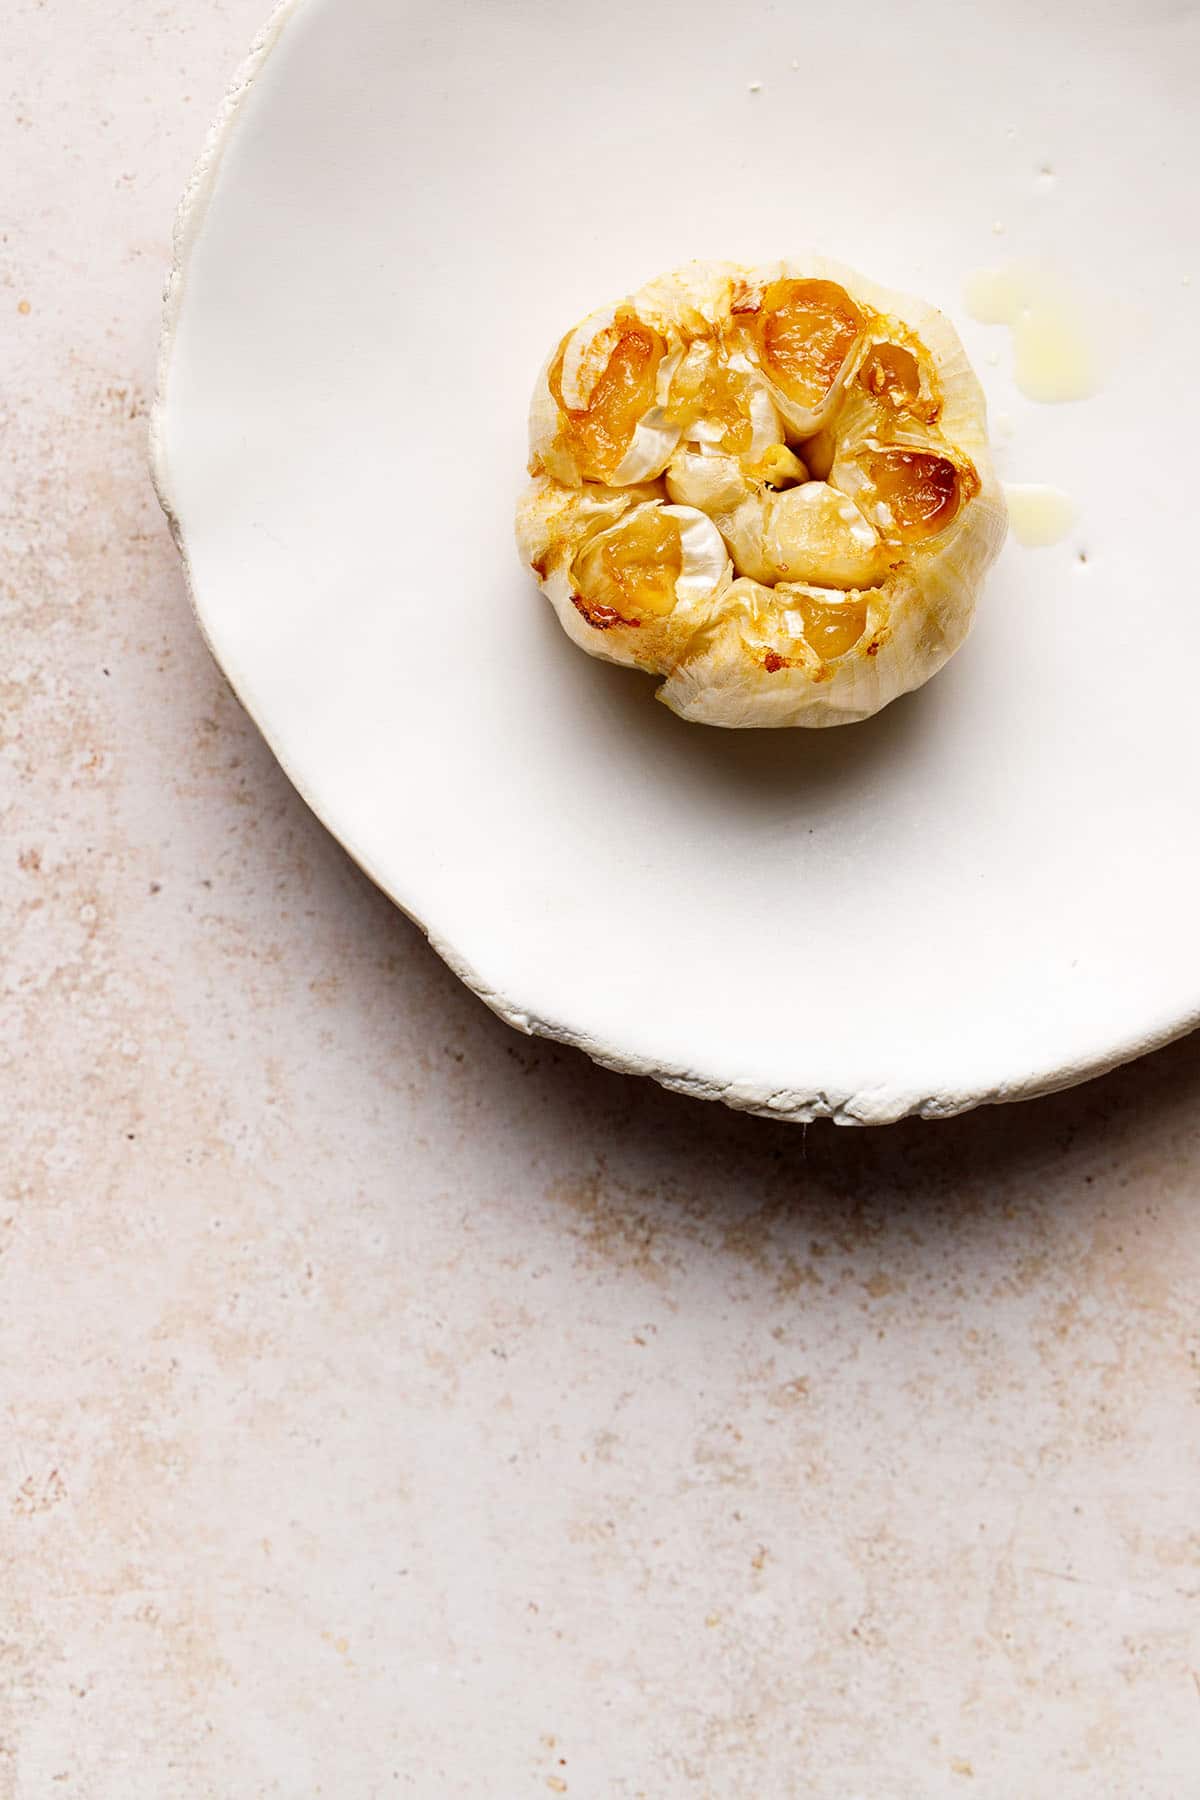 A bulb of air fryer roasted garlic on a white porcelain plate.